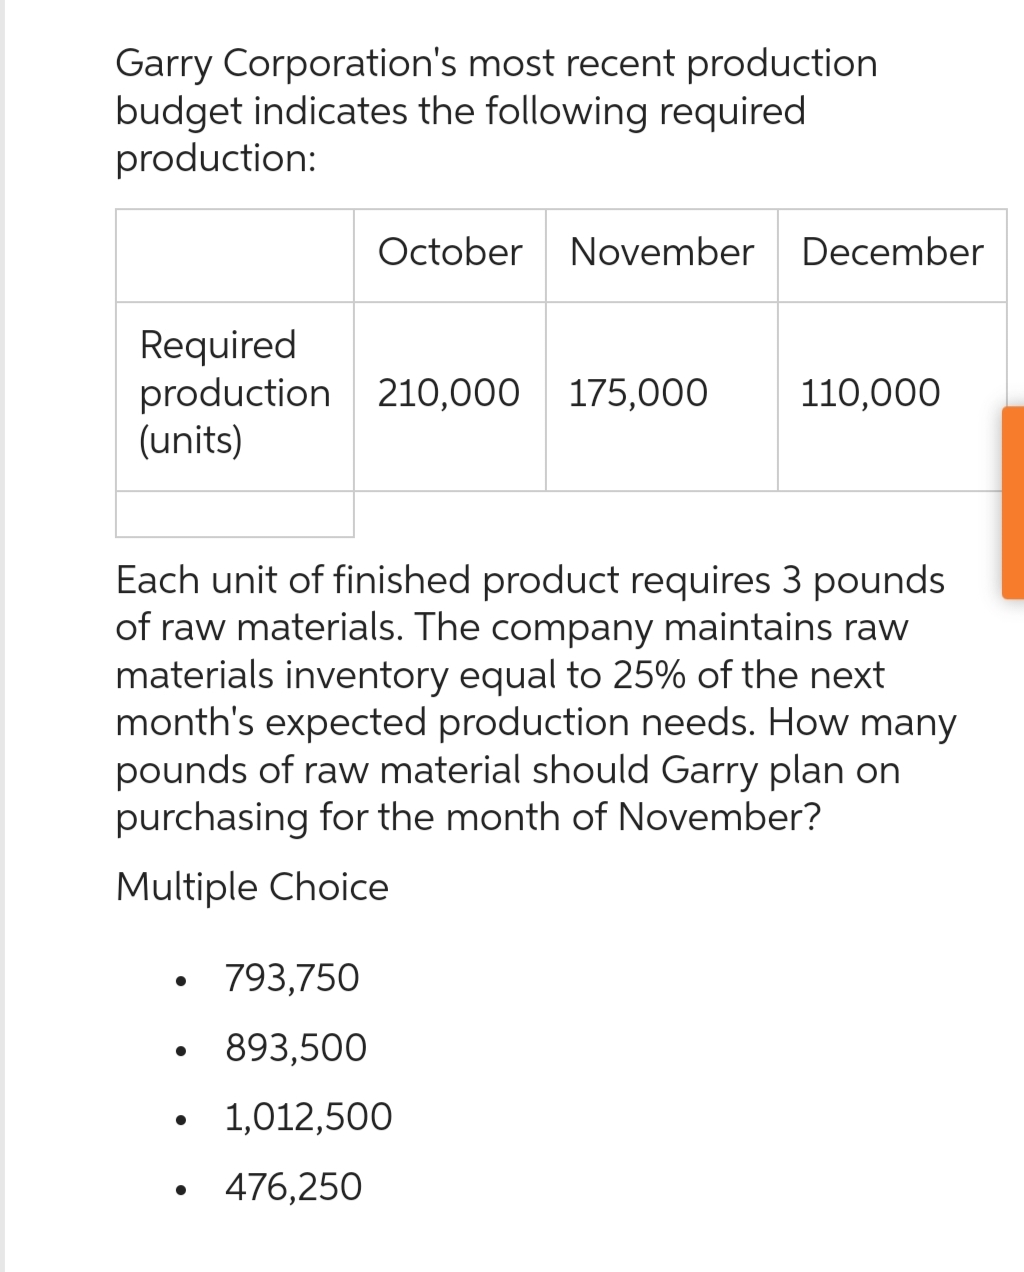 Garry Corporation's most recent production
budget indicates the following required
production:
October November December
Required
production 210,000 175,000 110,000
(units)
Each unit of finished product requires 3 pounds
of raw materials. The company maintains raw
materials inventory equal to 25% of the next
month's expected production needs. How many
pounds of raw material should Garry plan on
purchasing for the month of November?
Multiple Choice
●
793,750
893,500
1,012,500
476,250